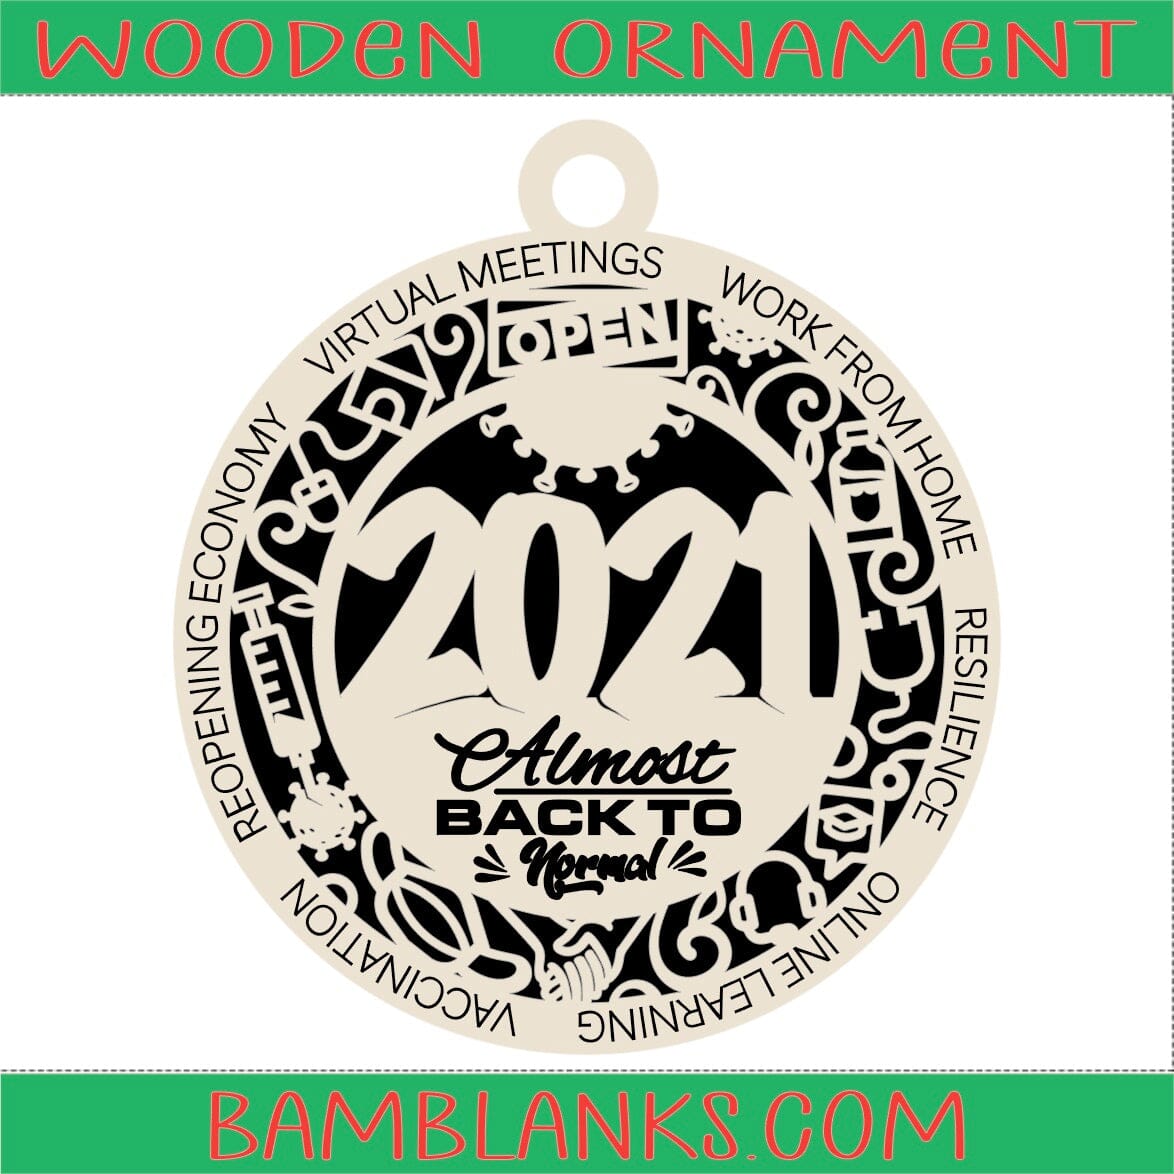 2021 Almost Back to Normal - Wood Ornament #W135